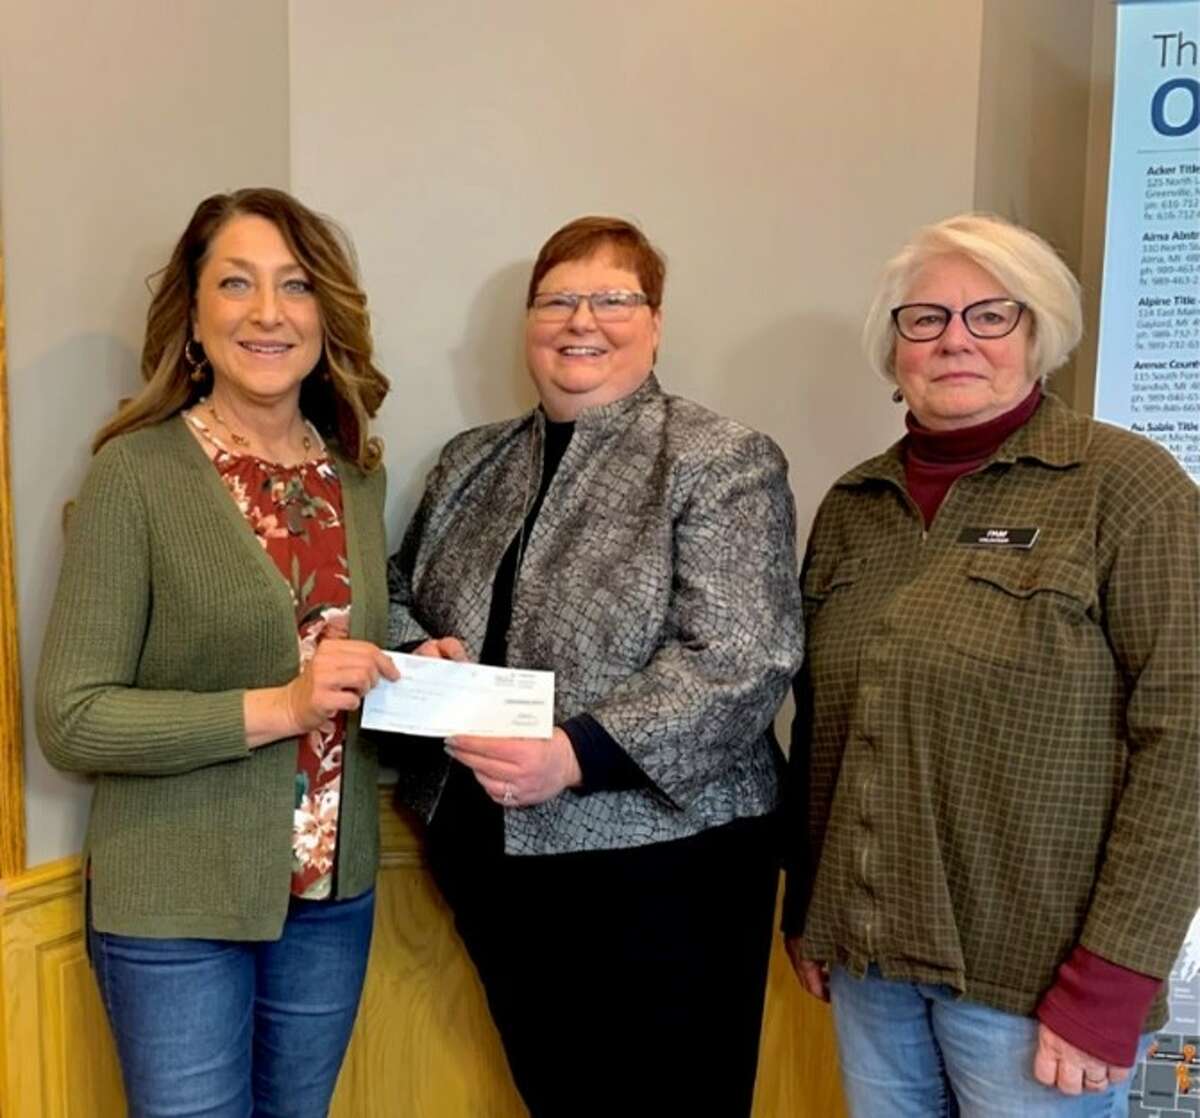 Ice Mountain natural resource manager Arlene Anderson-Vincent (left) presented a check for $2,000 to Barryton Mobile Food Pantry board members Karen McKenzie (center) and Pam Forbes (right).